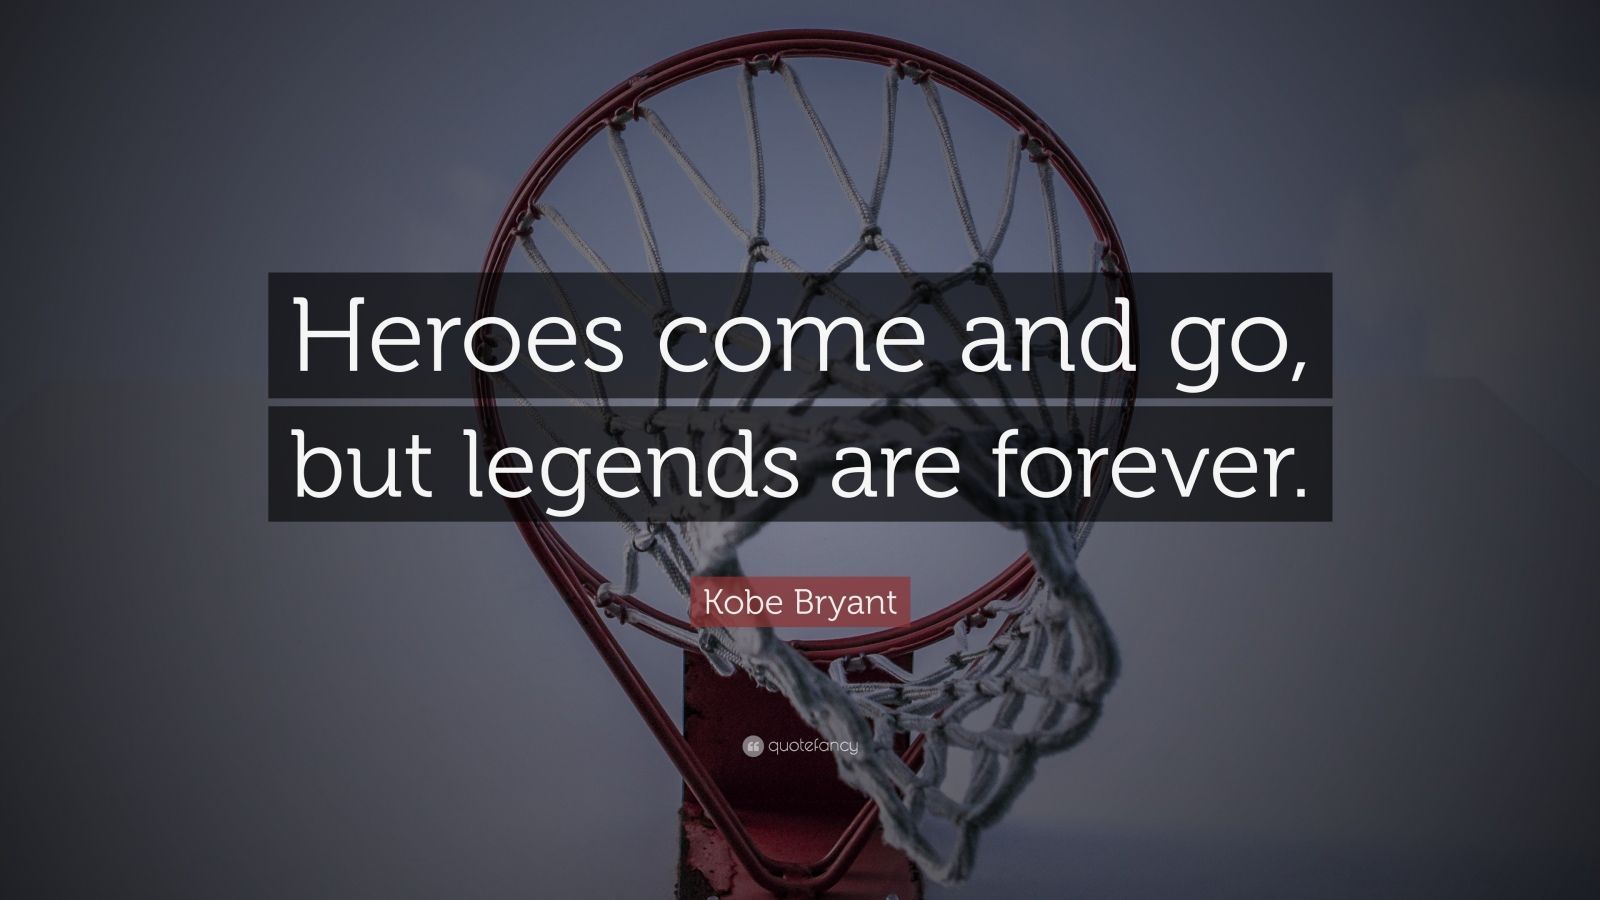 Kobe Bryant Quote: “Heroes come and go, but legends are forever.” (18 wallpaper)